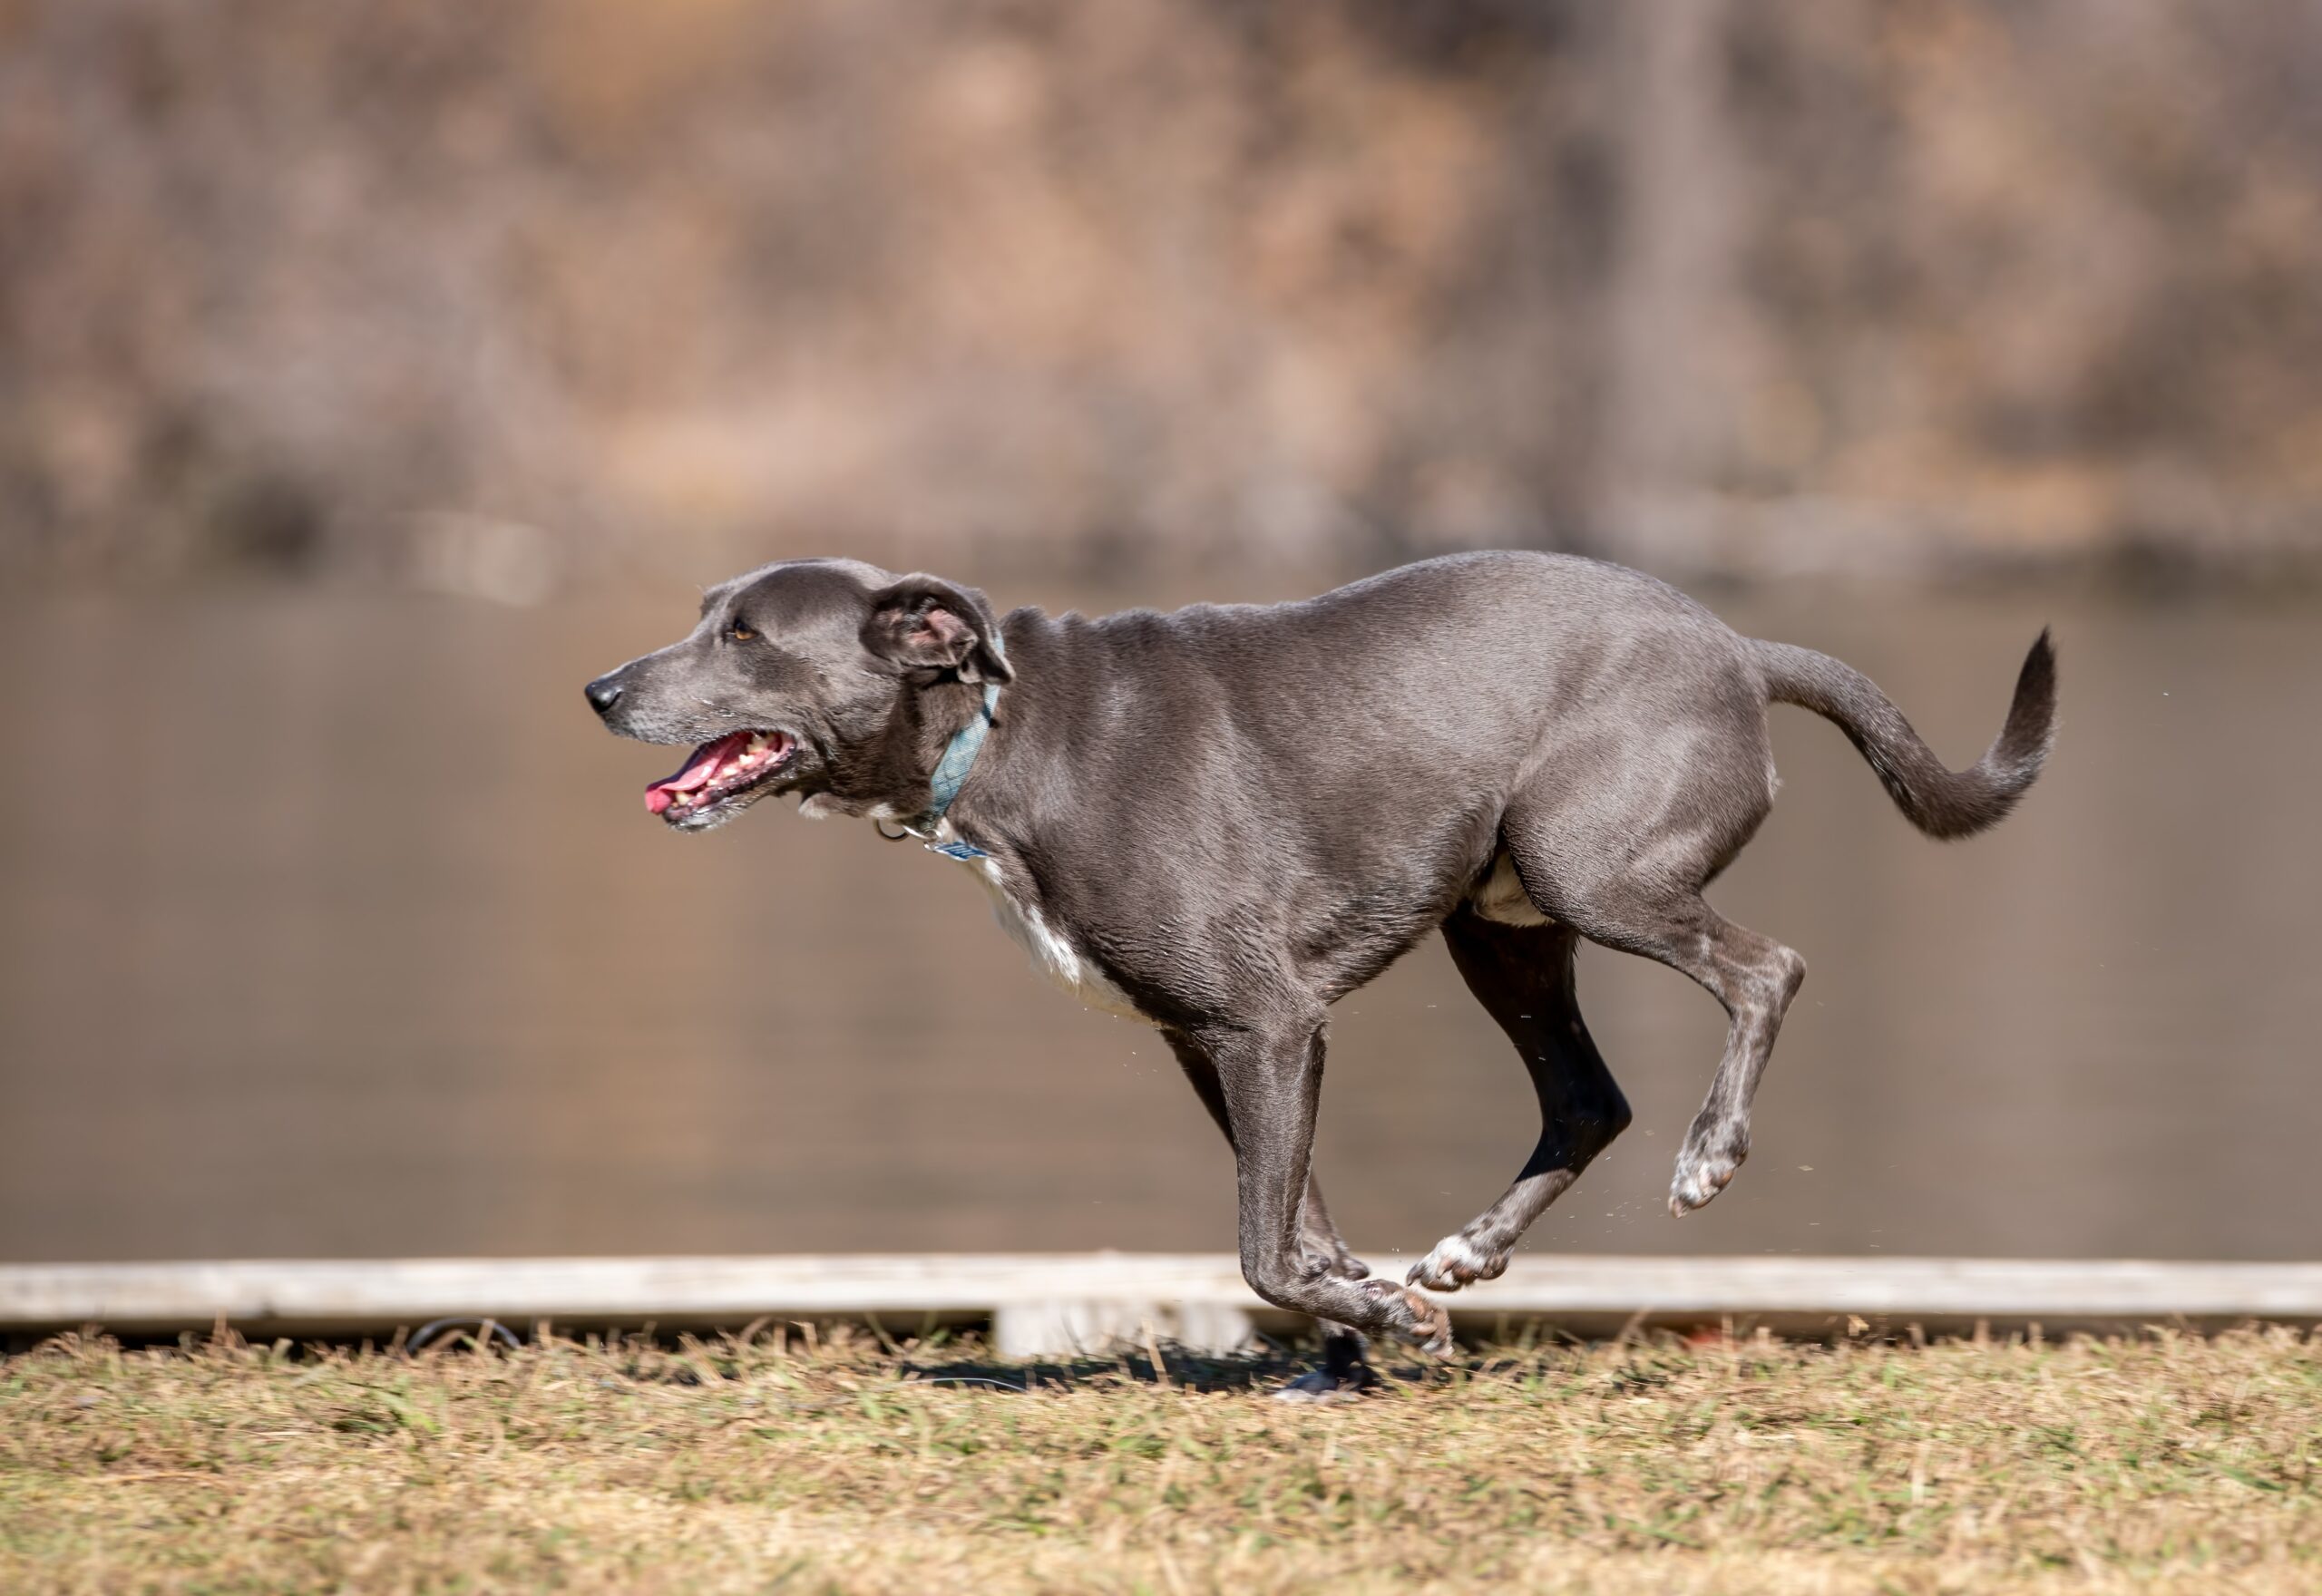 Incorporating Exercise: A Guide to Keeping Your Dog Fit and Happy